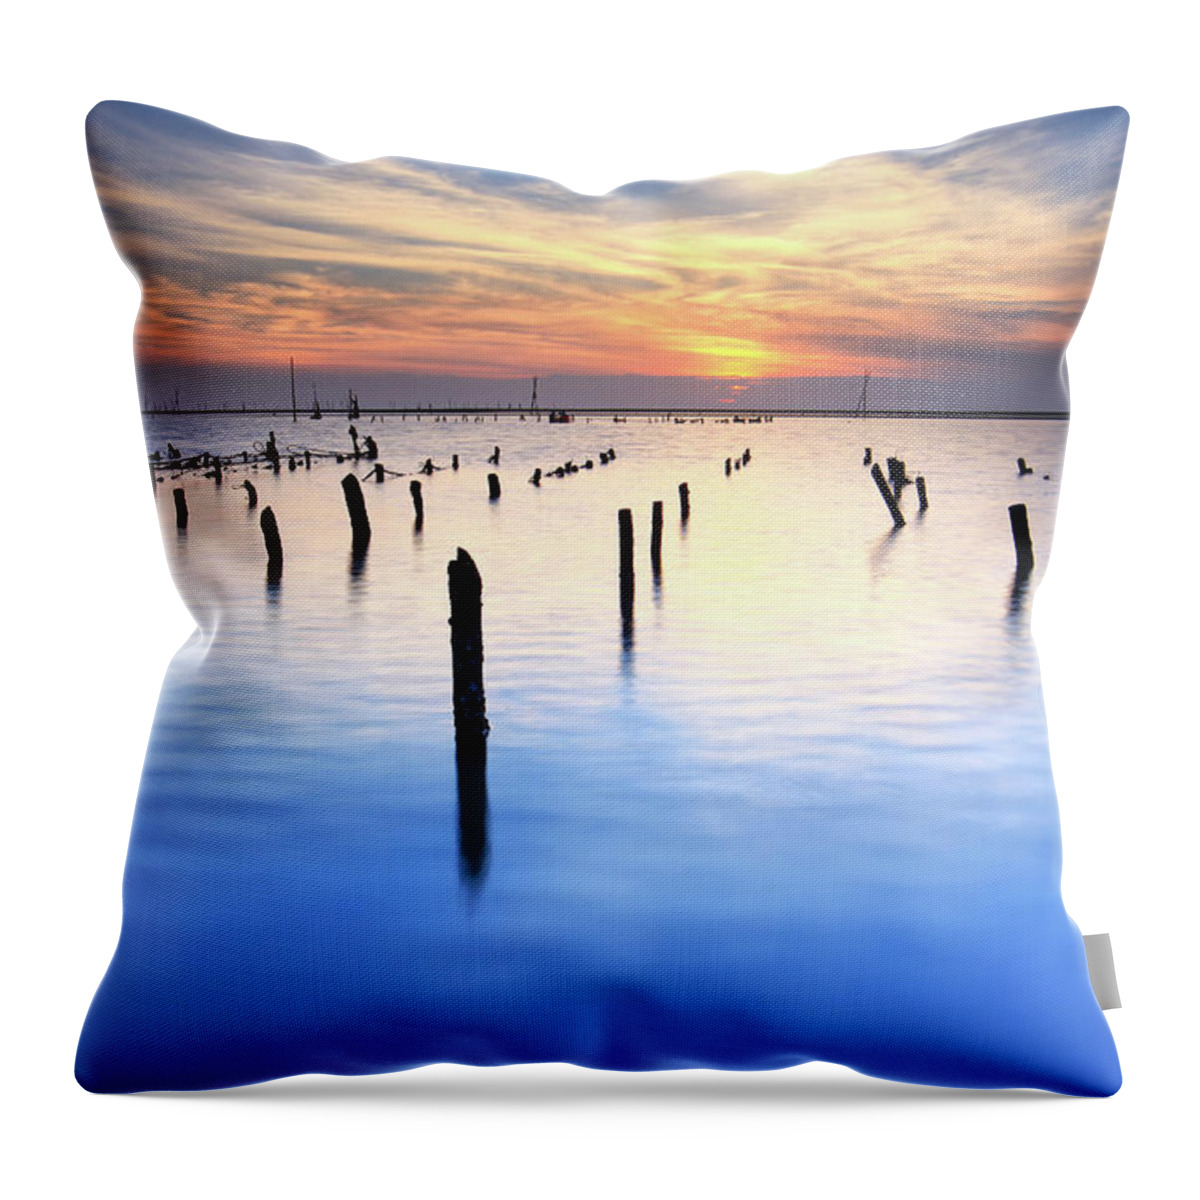 Tranquility Throw Pillow featuring the photograph Dusk At Oyster Field by Thunderbolt tw (bai Heng-yao) Photography